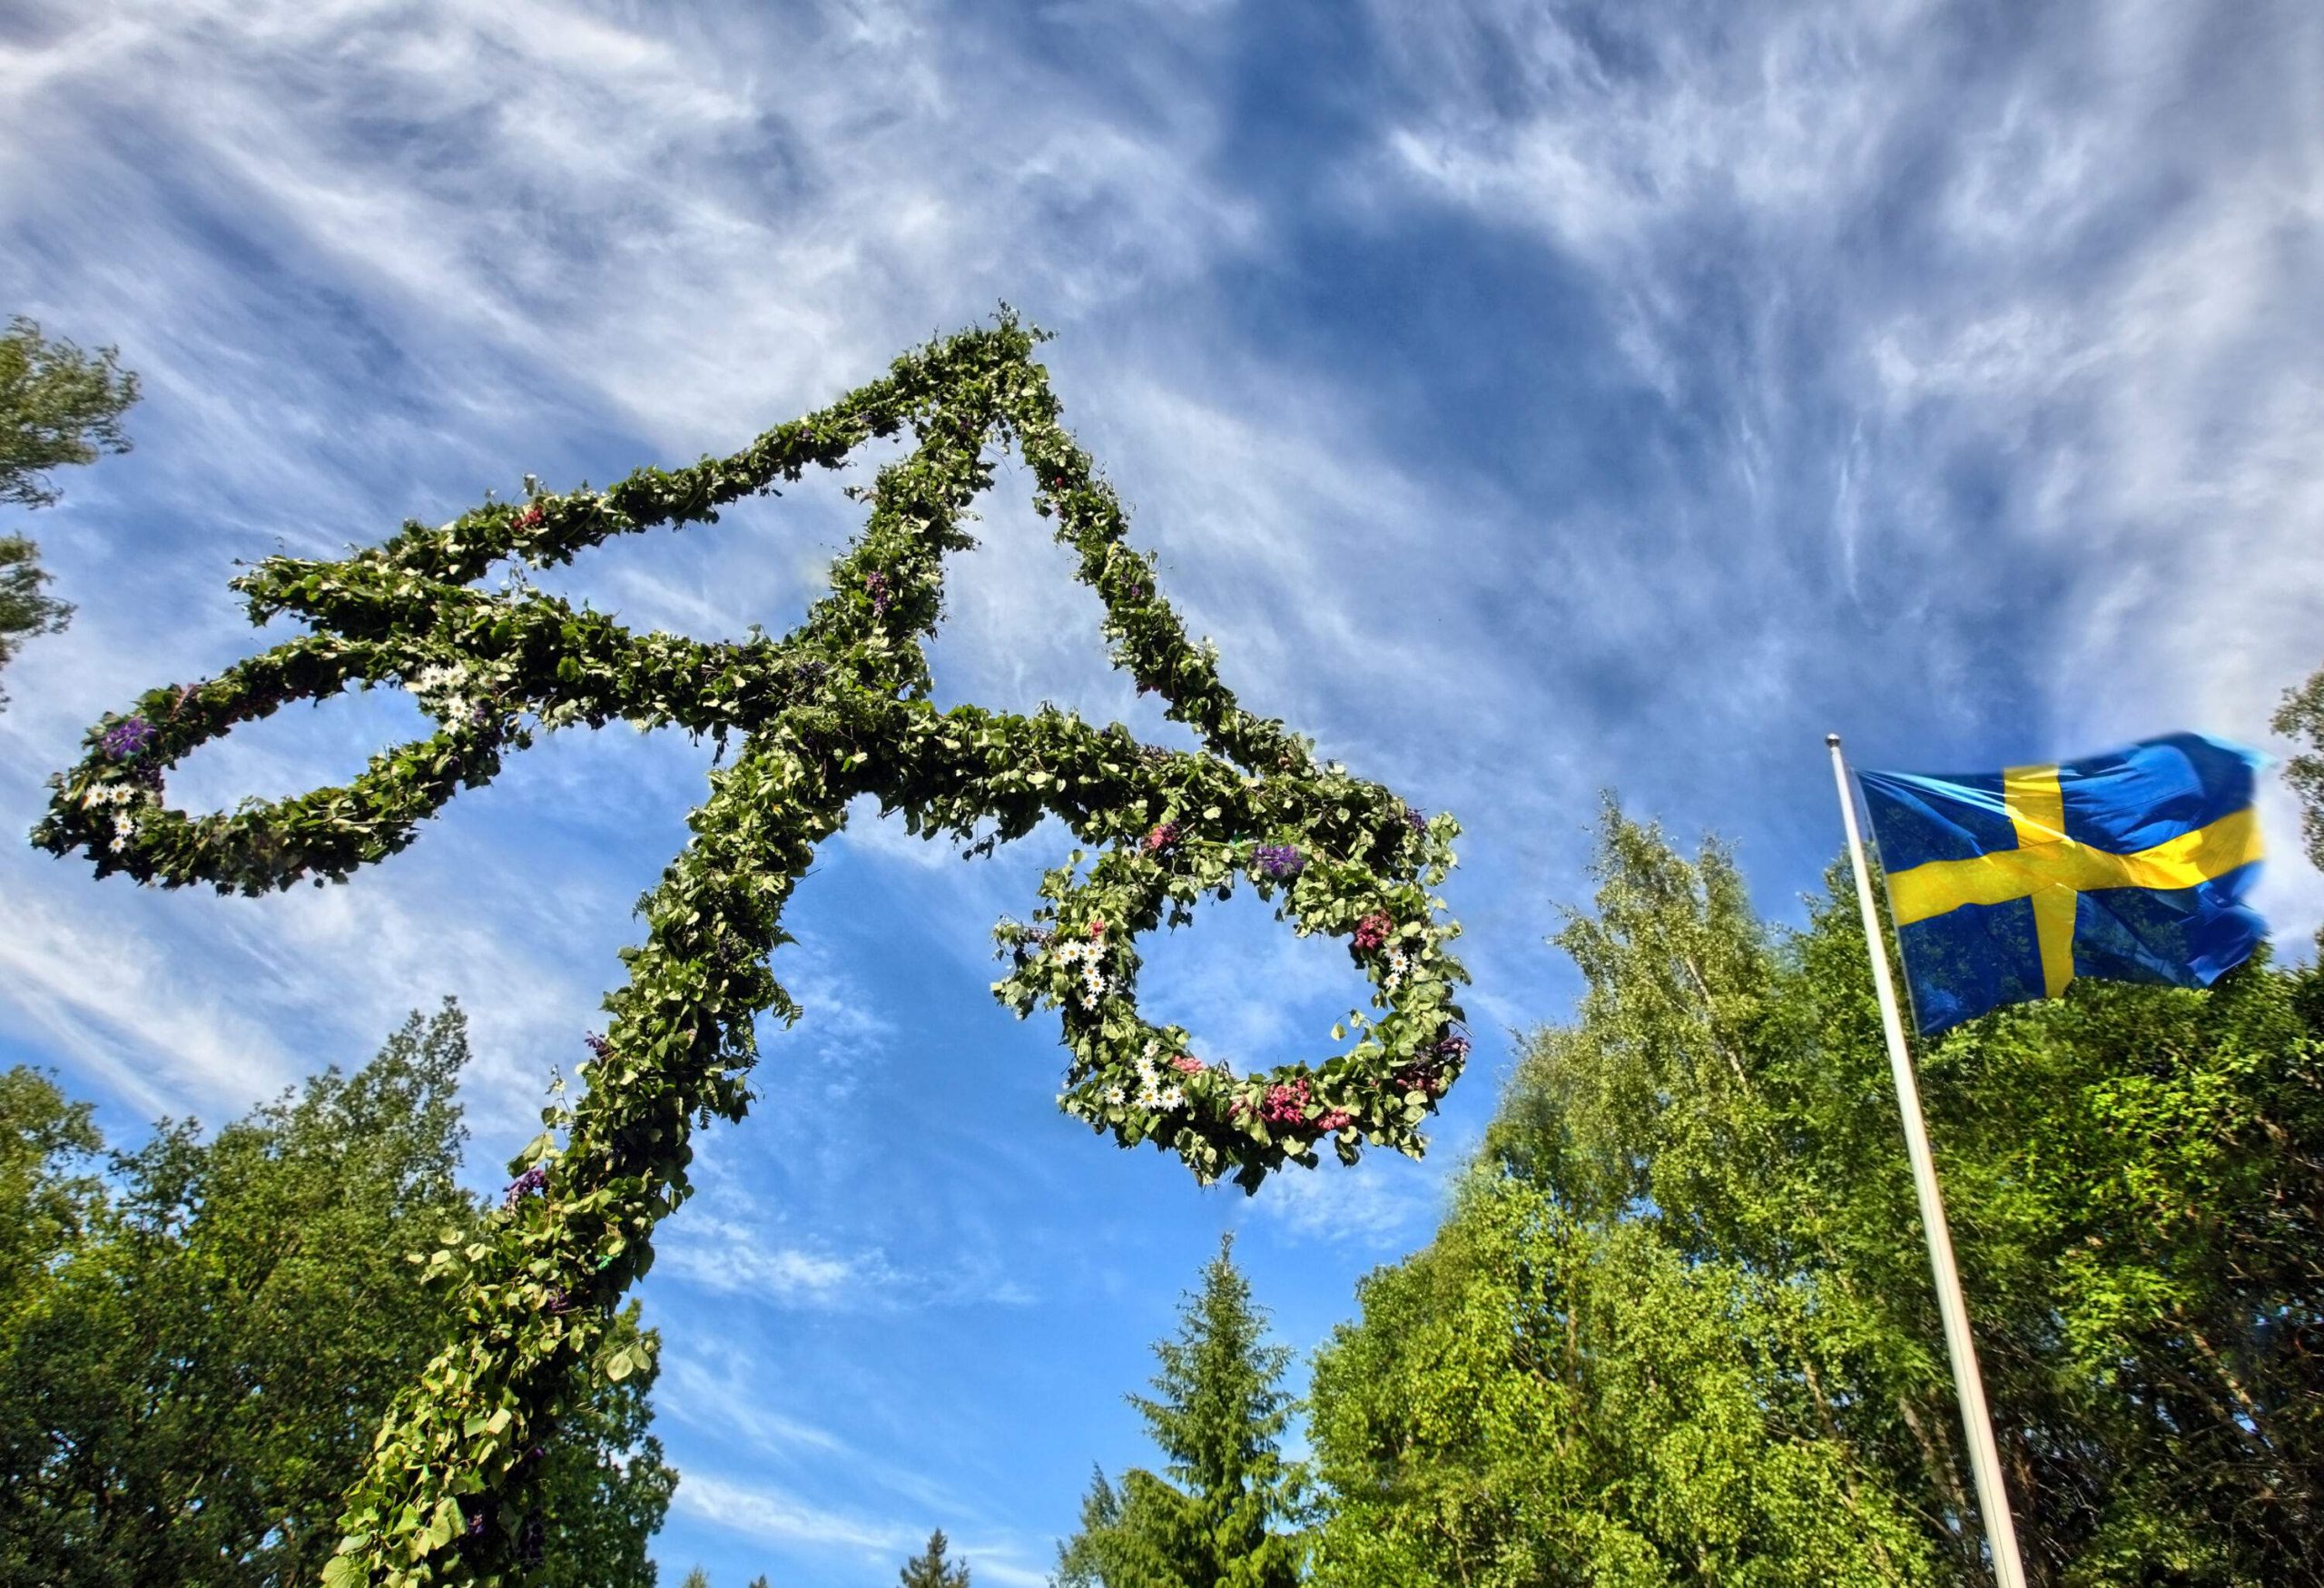 A triangular pole with hanging loops covered with leaves and flowers stands beside a Swedish flag raised on a white shaft.